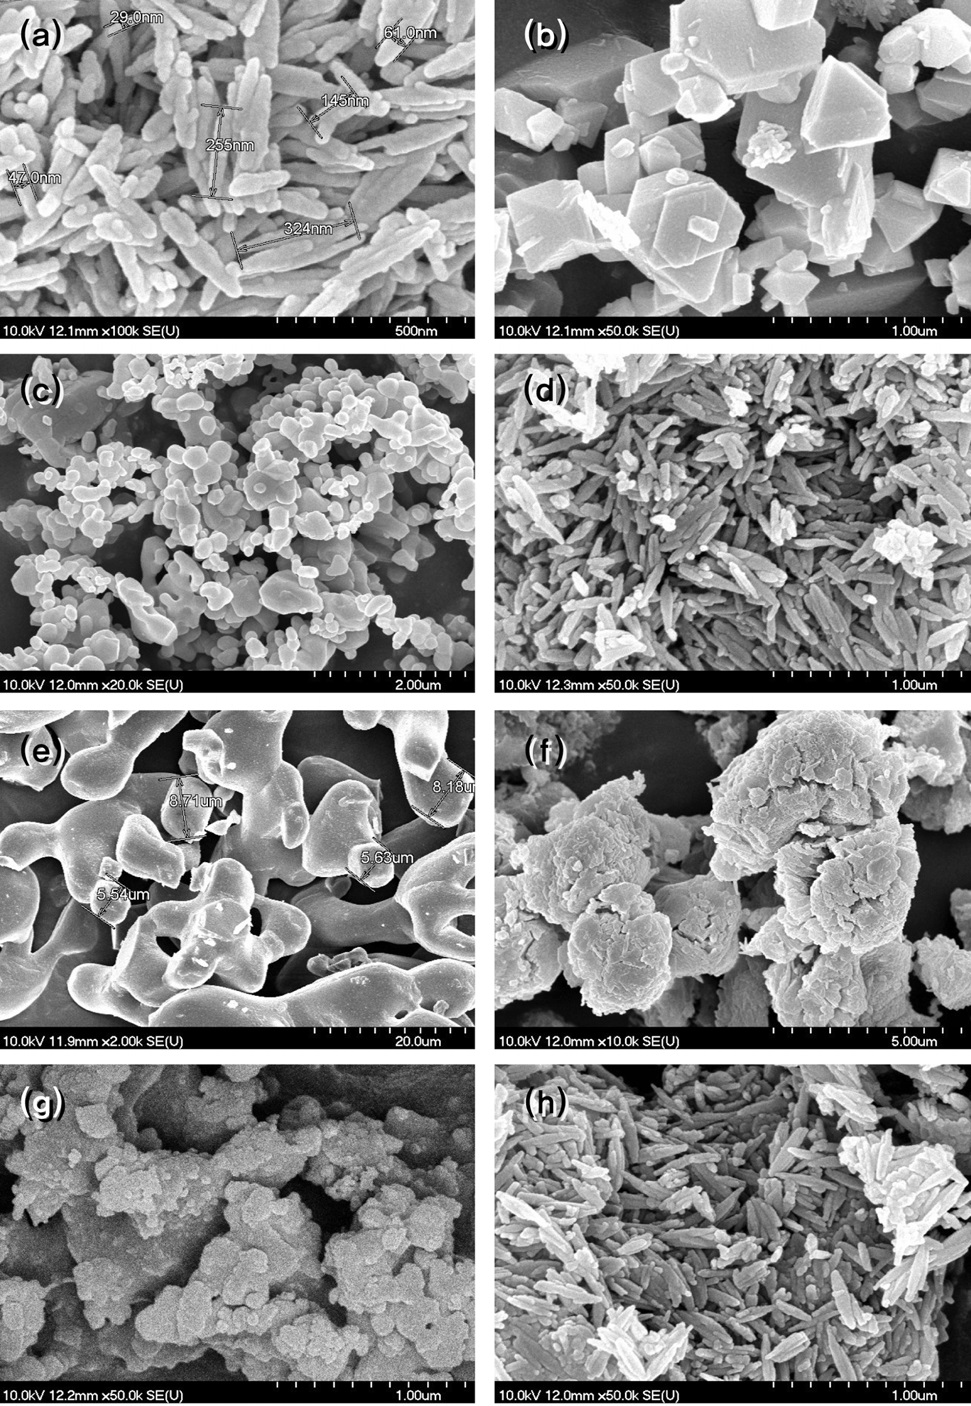 SEM photomicrographs of sorbents:(a) α-FeO(OH), (b) Fe3O4, (c) Fe2O3, (d) Fe-C(powder), (e) CaO, (f) Ca(OH)2, (g) CaH-C, (f) α-FeOOH/Ca(OH)2 mixture.